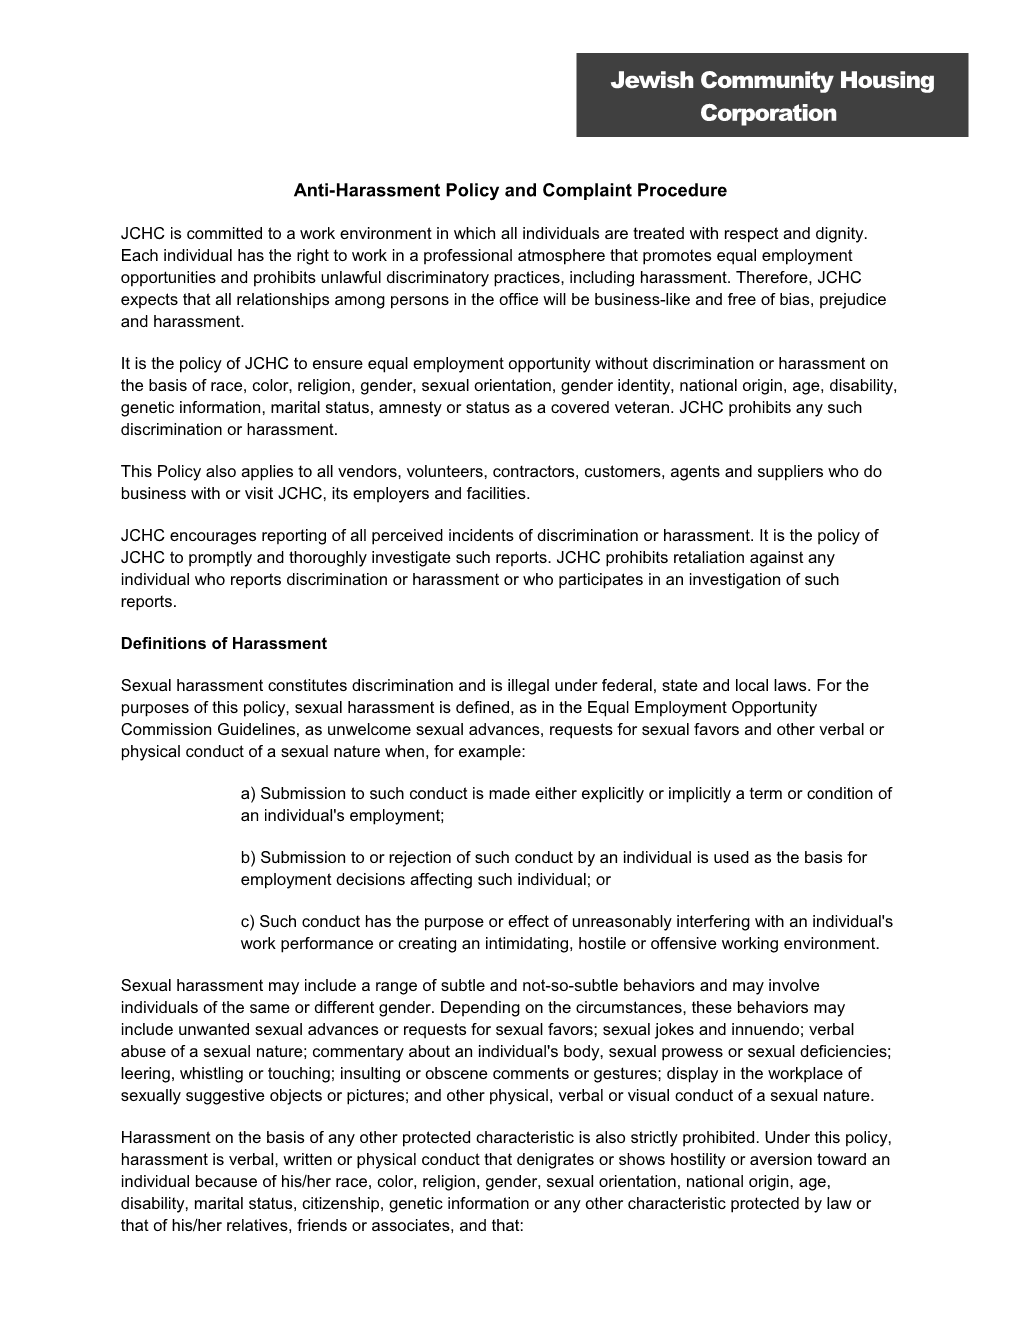 Anti-Harassment Policy and Complaint Procedure